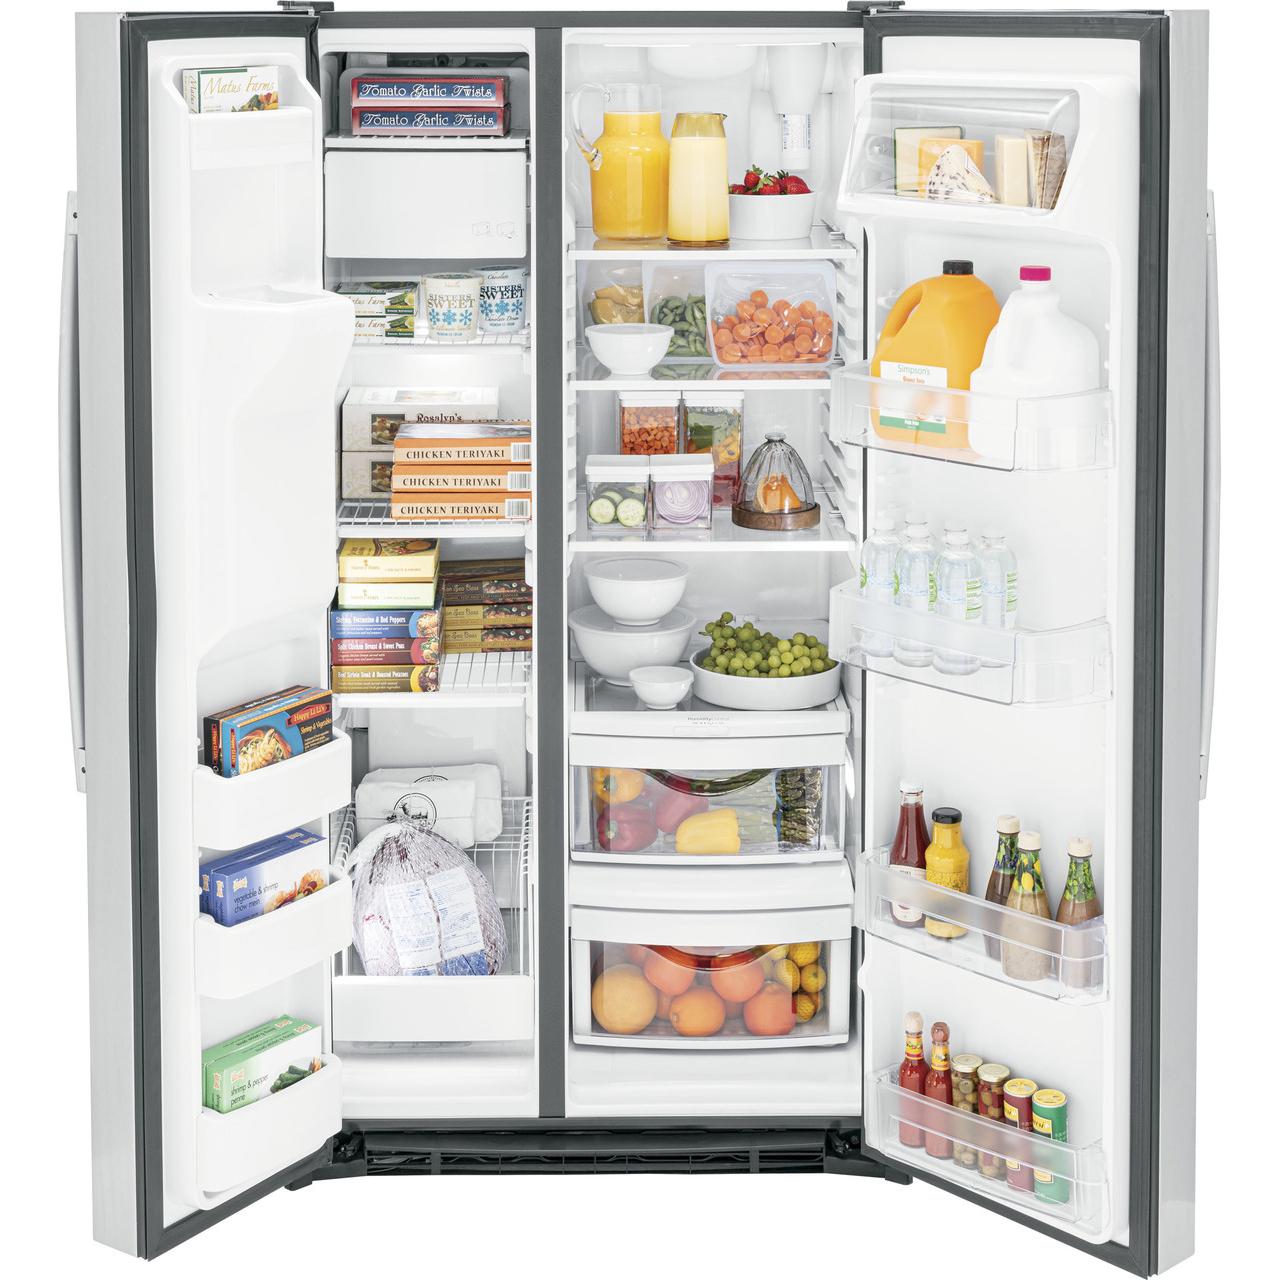 GE 36-inch 25.3 cu.ft. Freestanding Side-by-Side Refrigerator with LED Lighting GSE25GYPFS